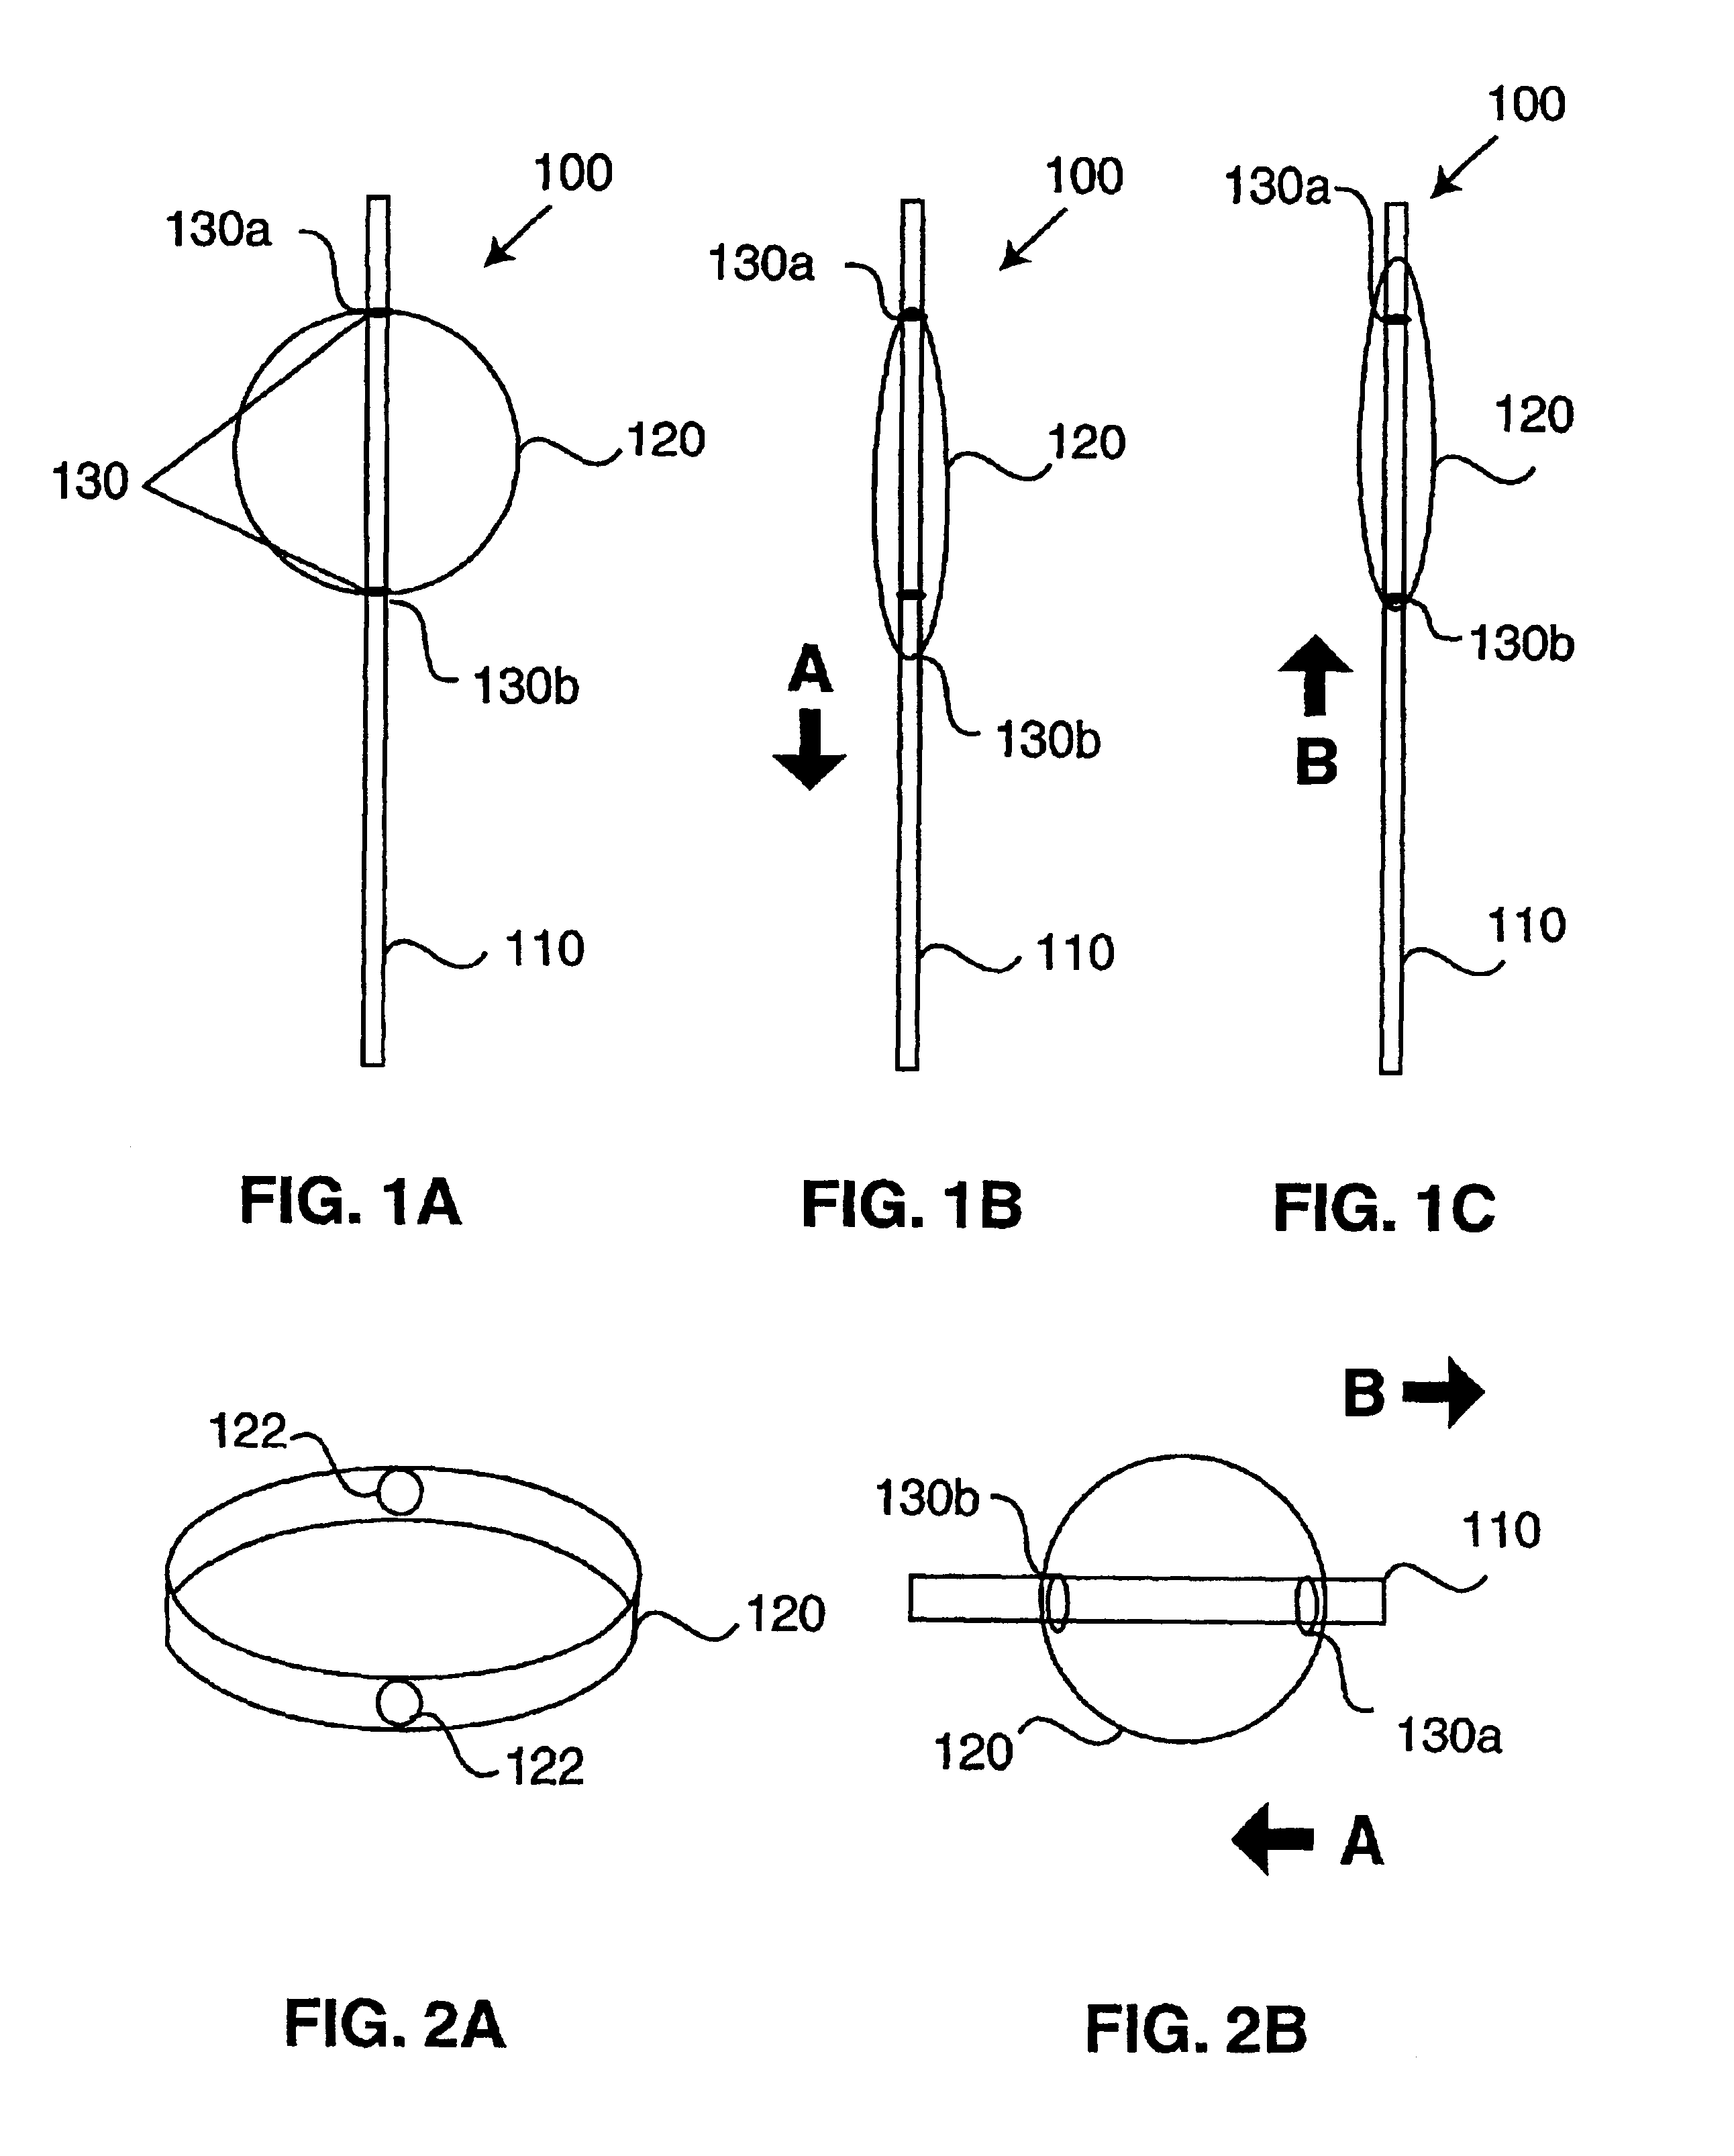 Incising apparatus for use in cataract surgery